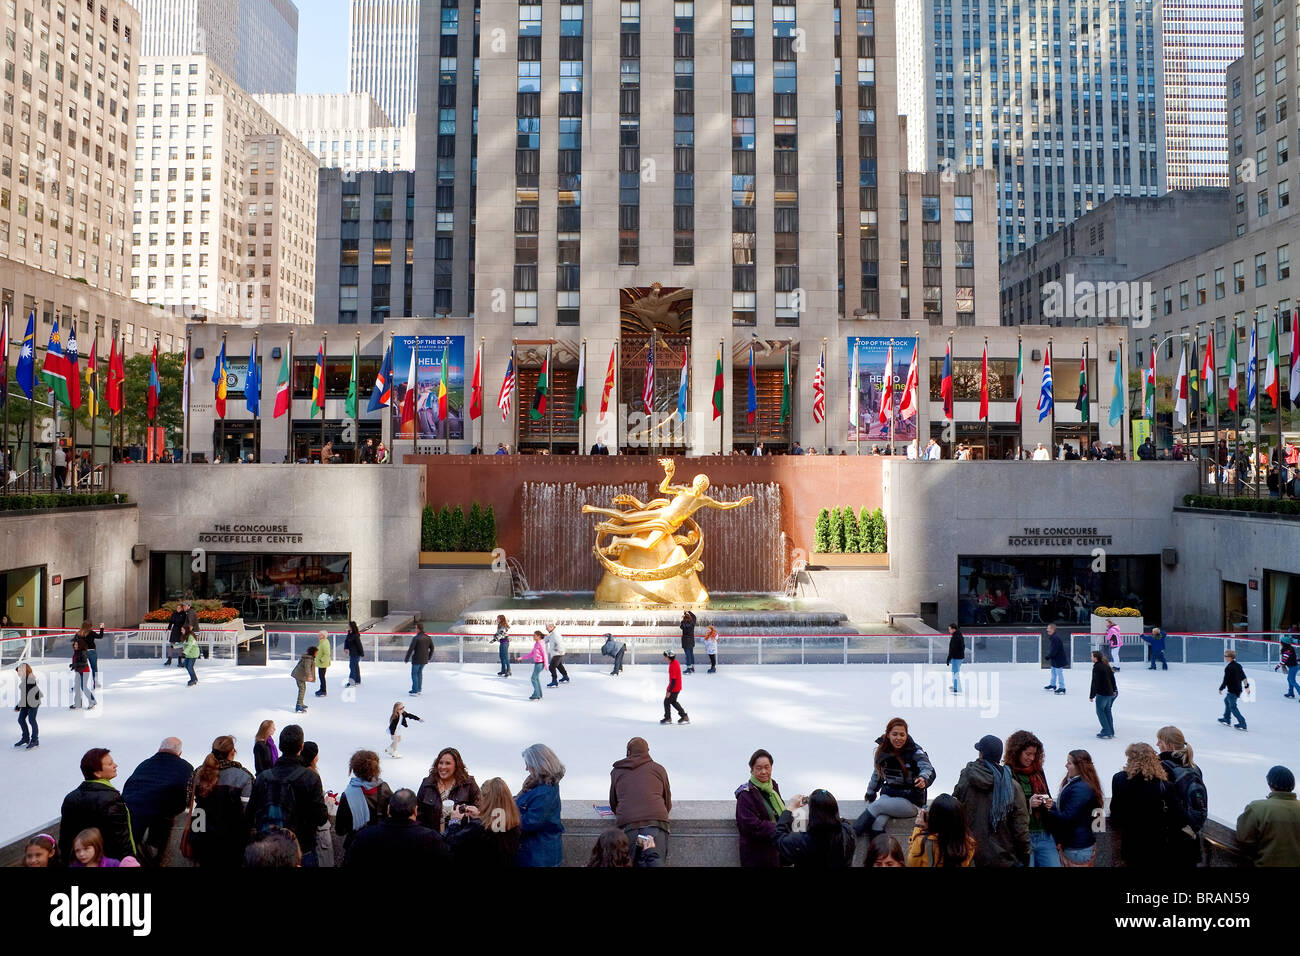 Ice Skating Rink below the Rockefeller Centre building on Fifth Avenue, New York City, New York, United States of America Stock Photo